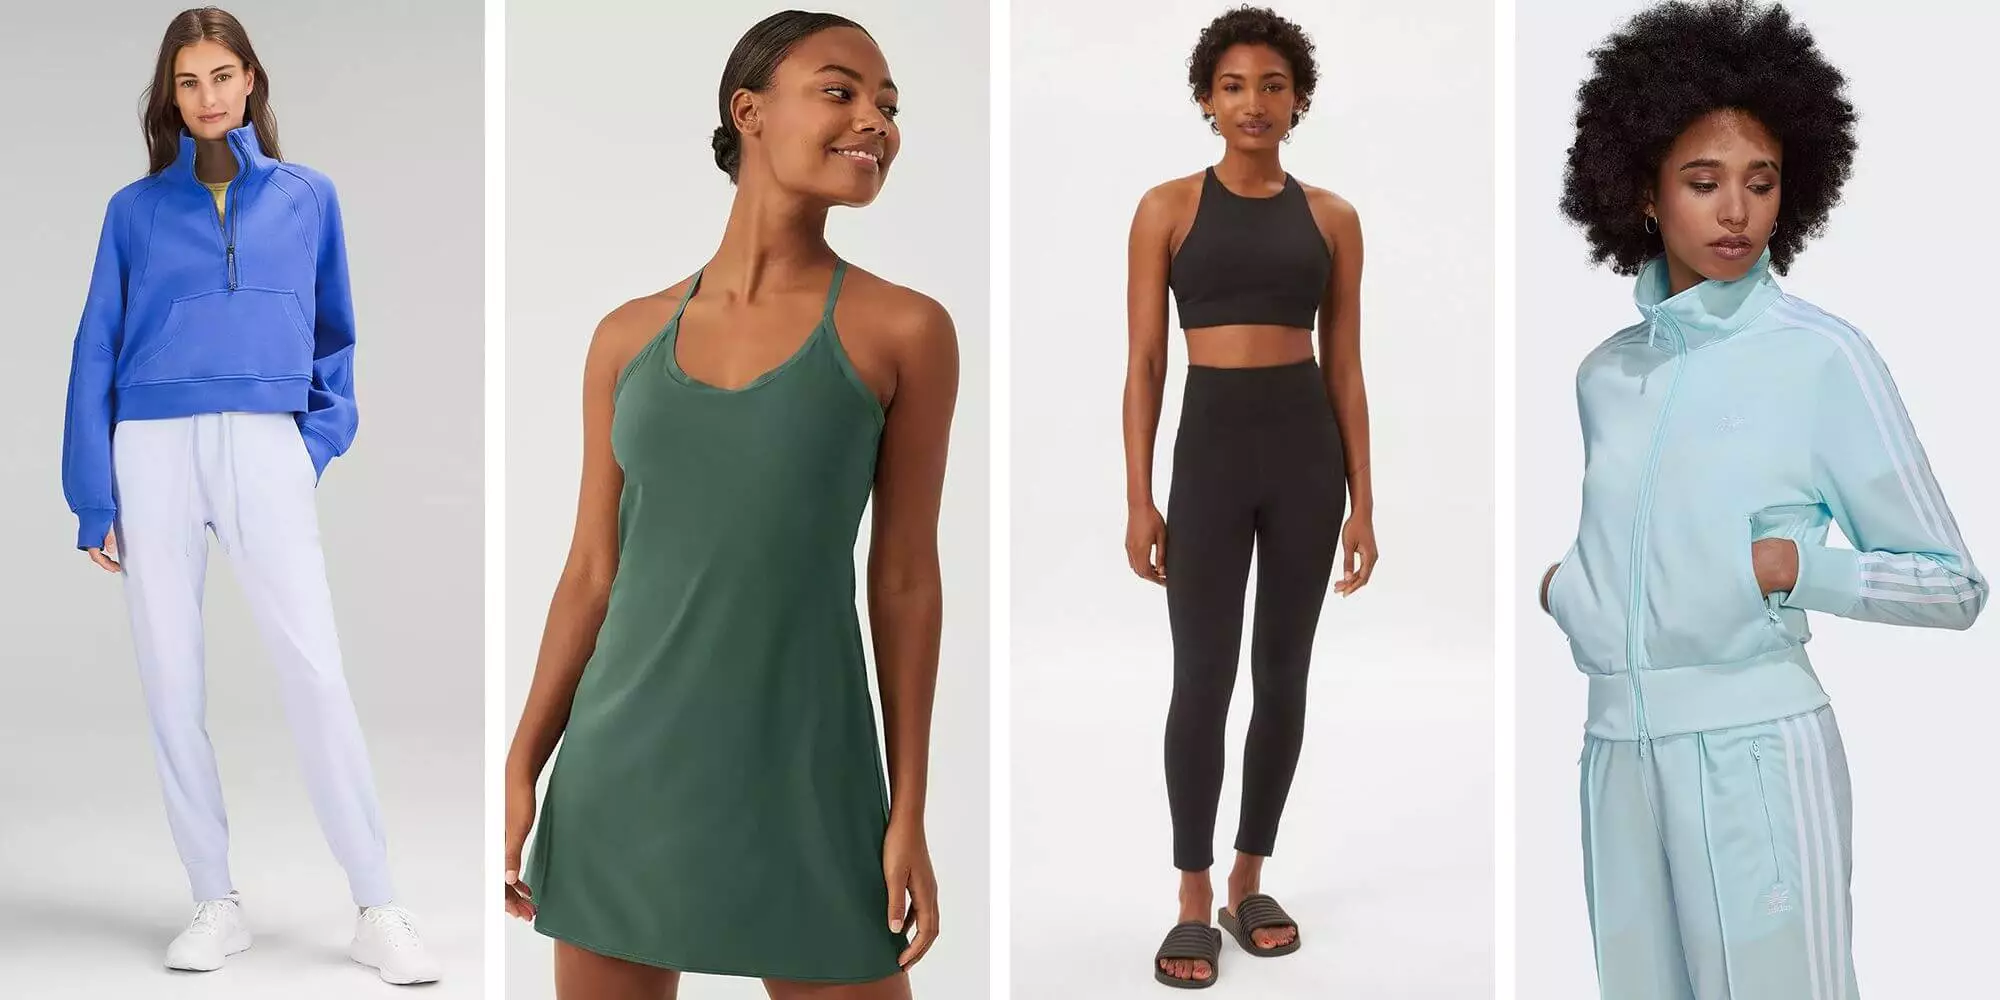 Top Athleisure Brands to Watch This Year